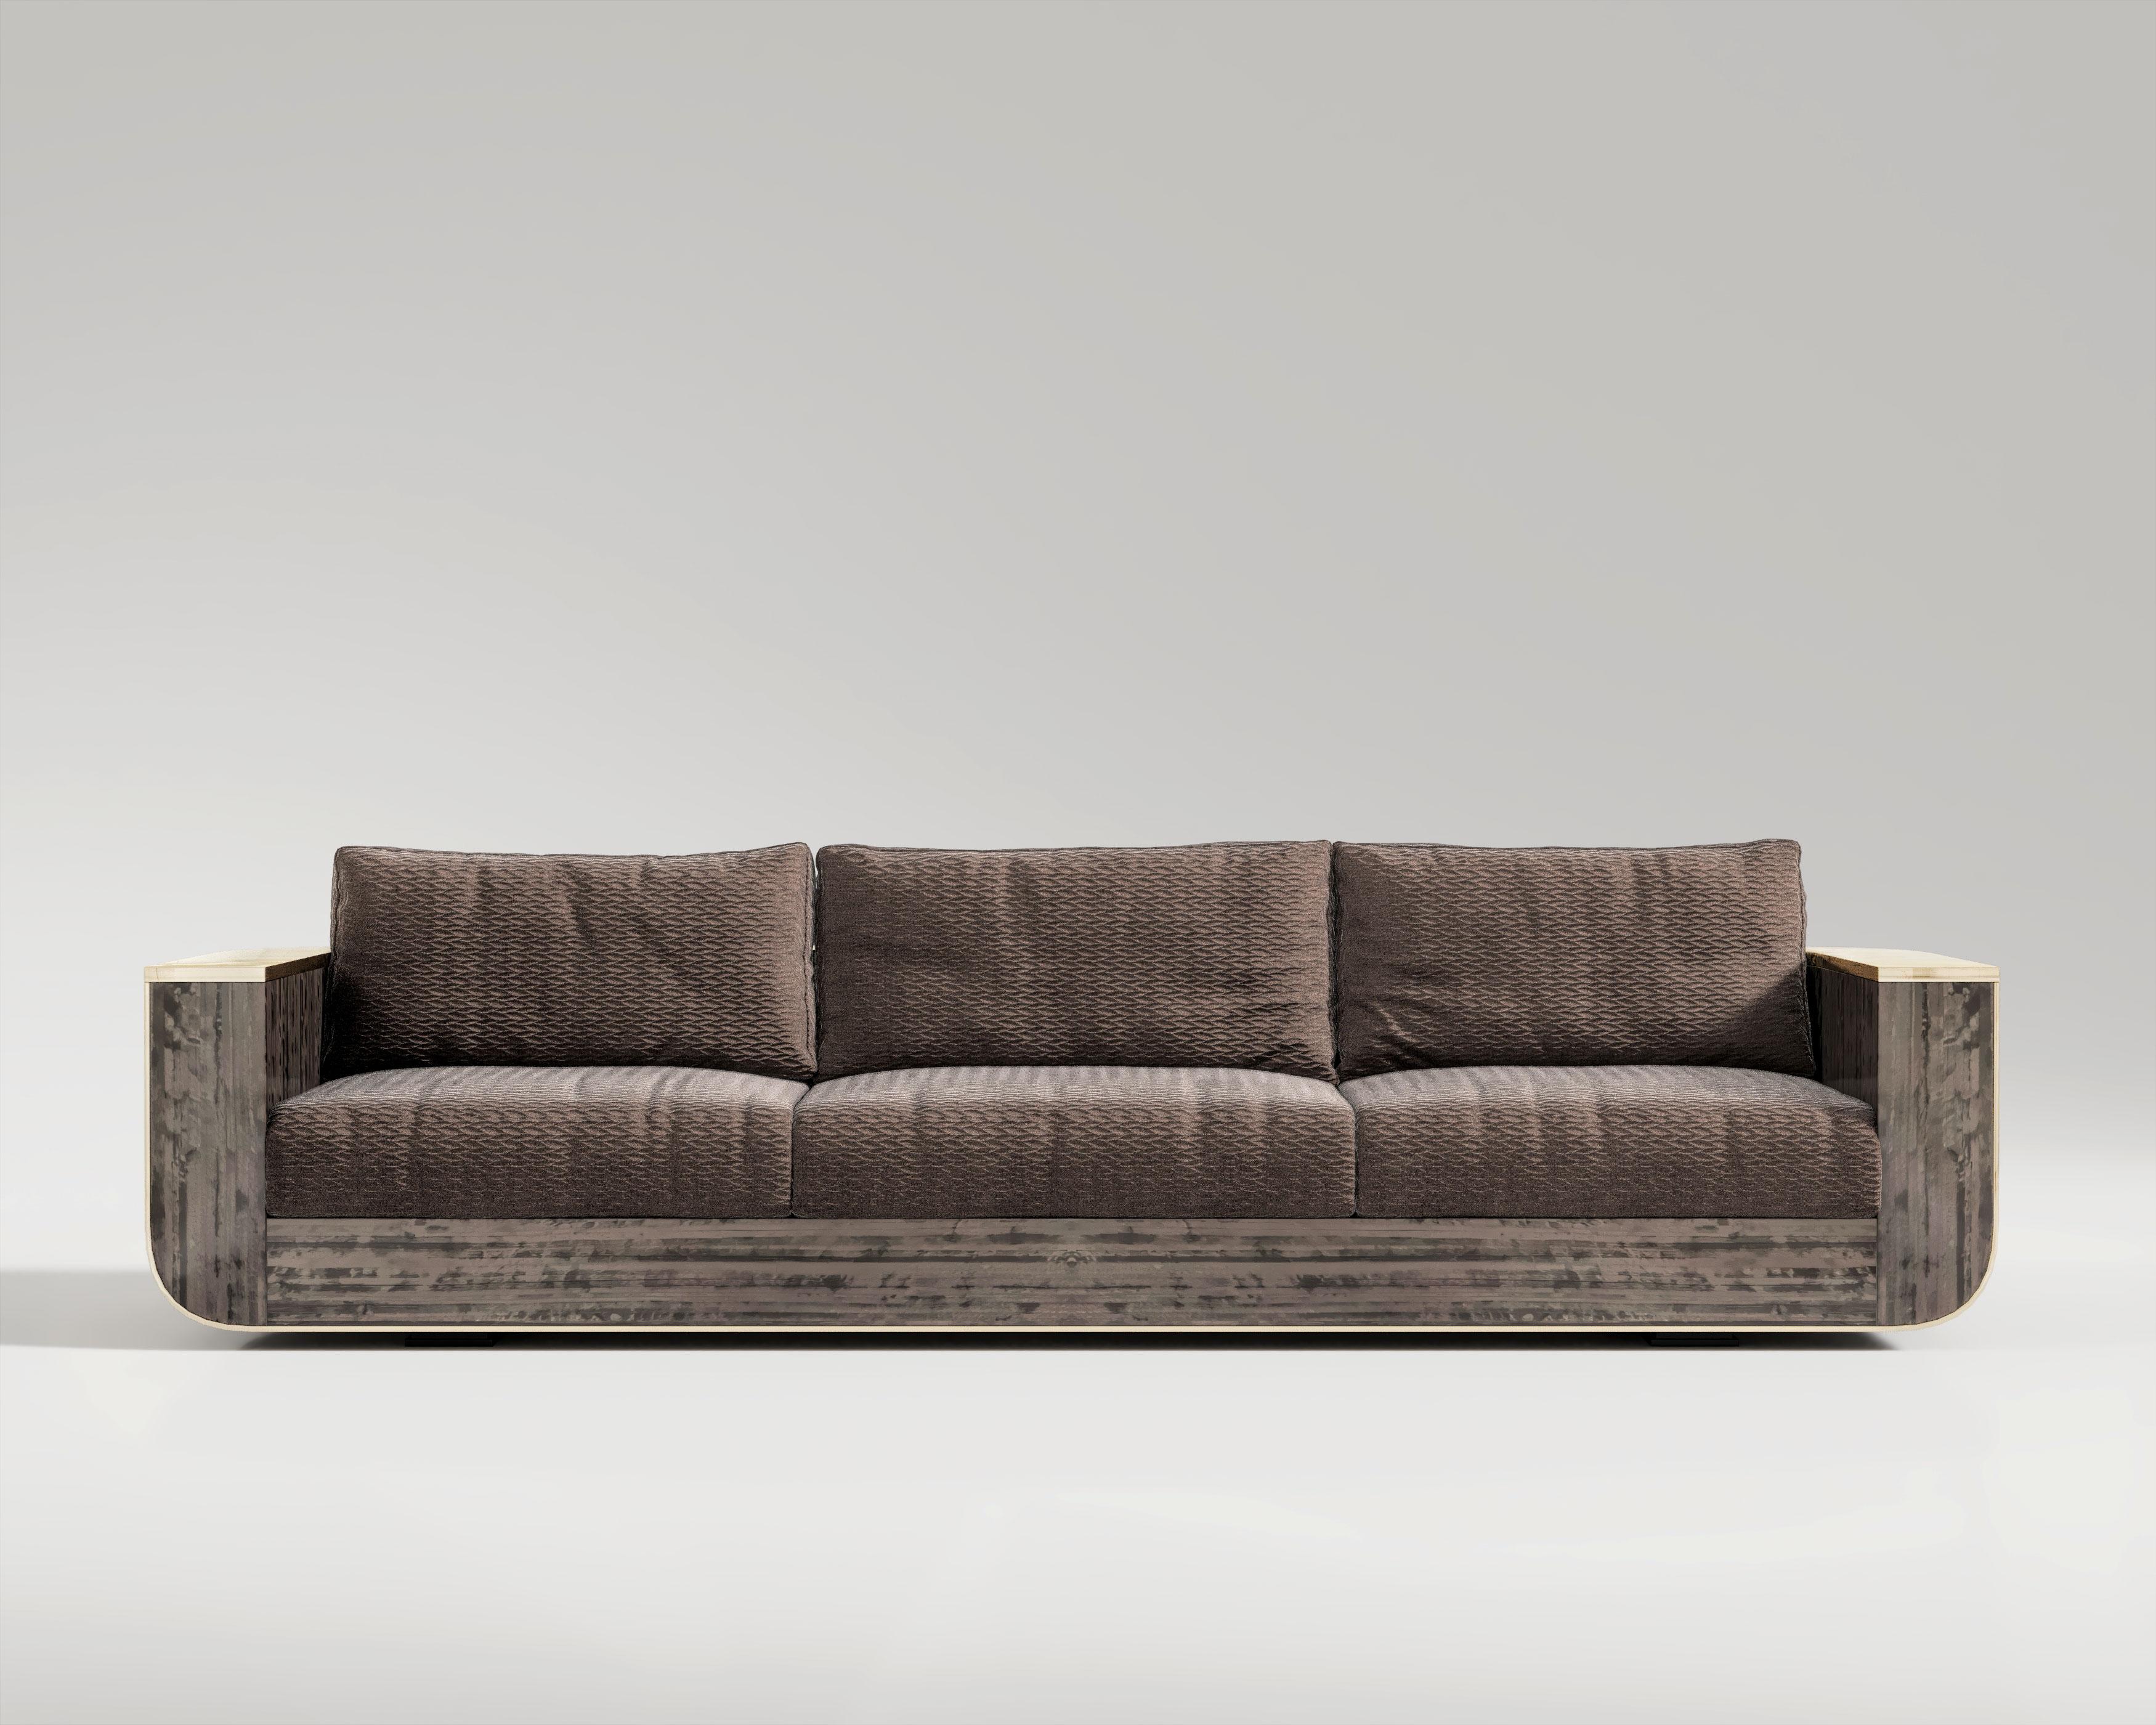 Forte Sofa Eucalyptus
The Forte Sofa is a contemporary handmade masterpiece, featuring a veneer frame with polished bronze accents for a touch of opulence. Its rounded corners and beautiful upholstery fabric provide a perfect balance of style and